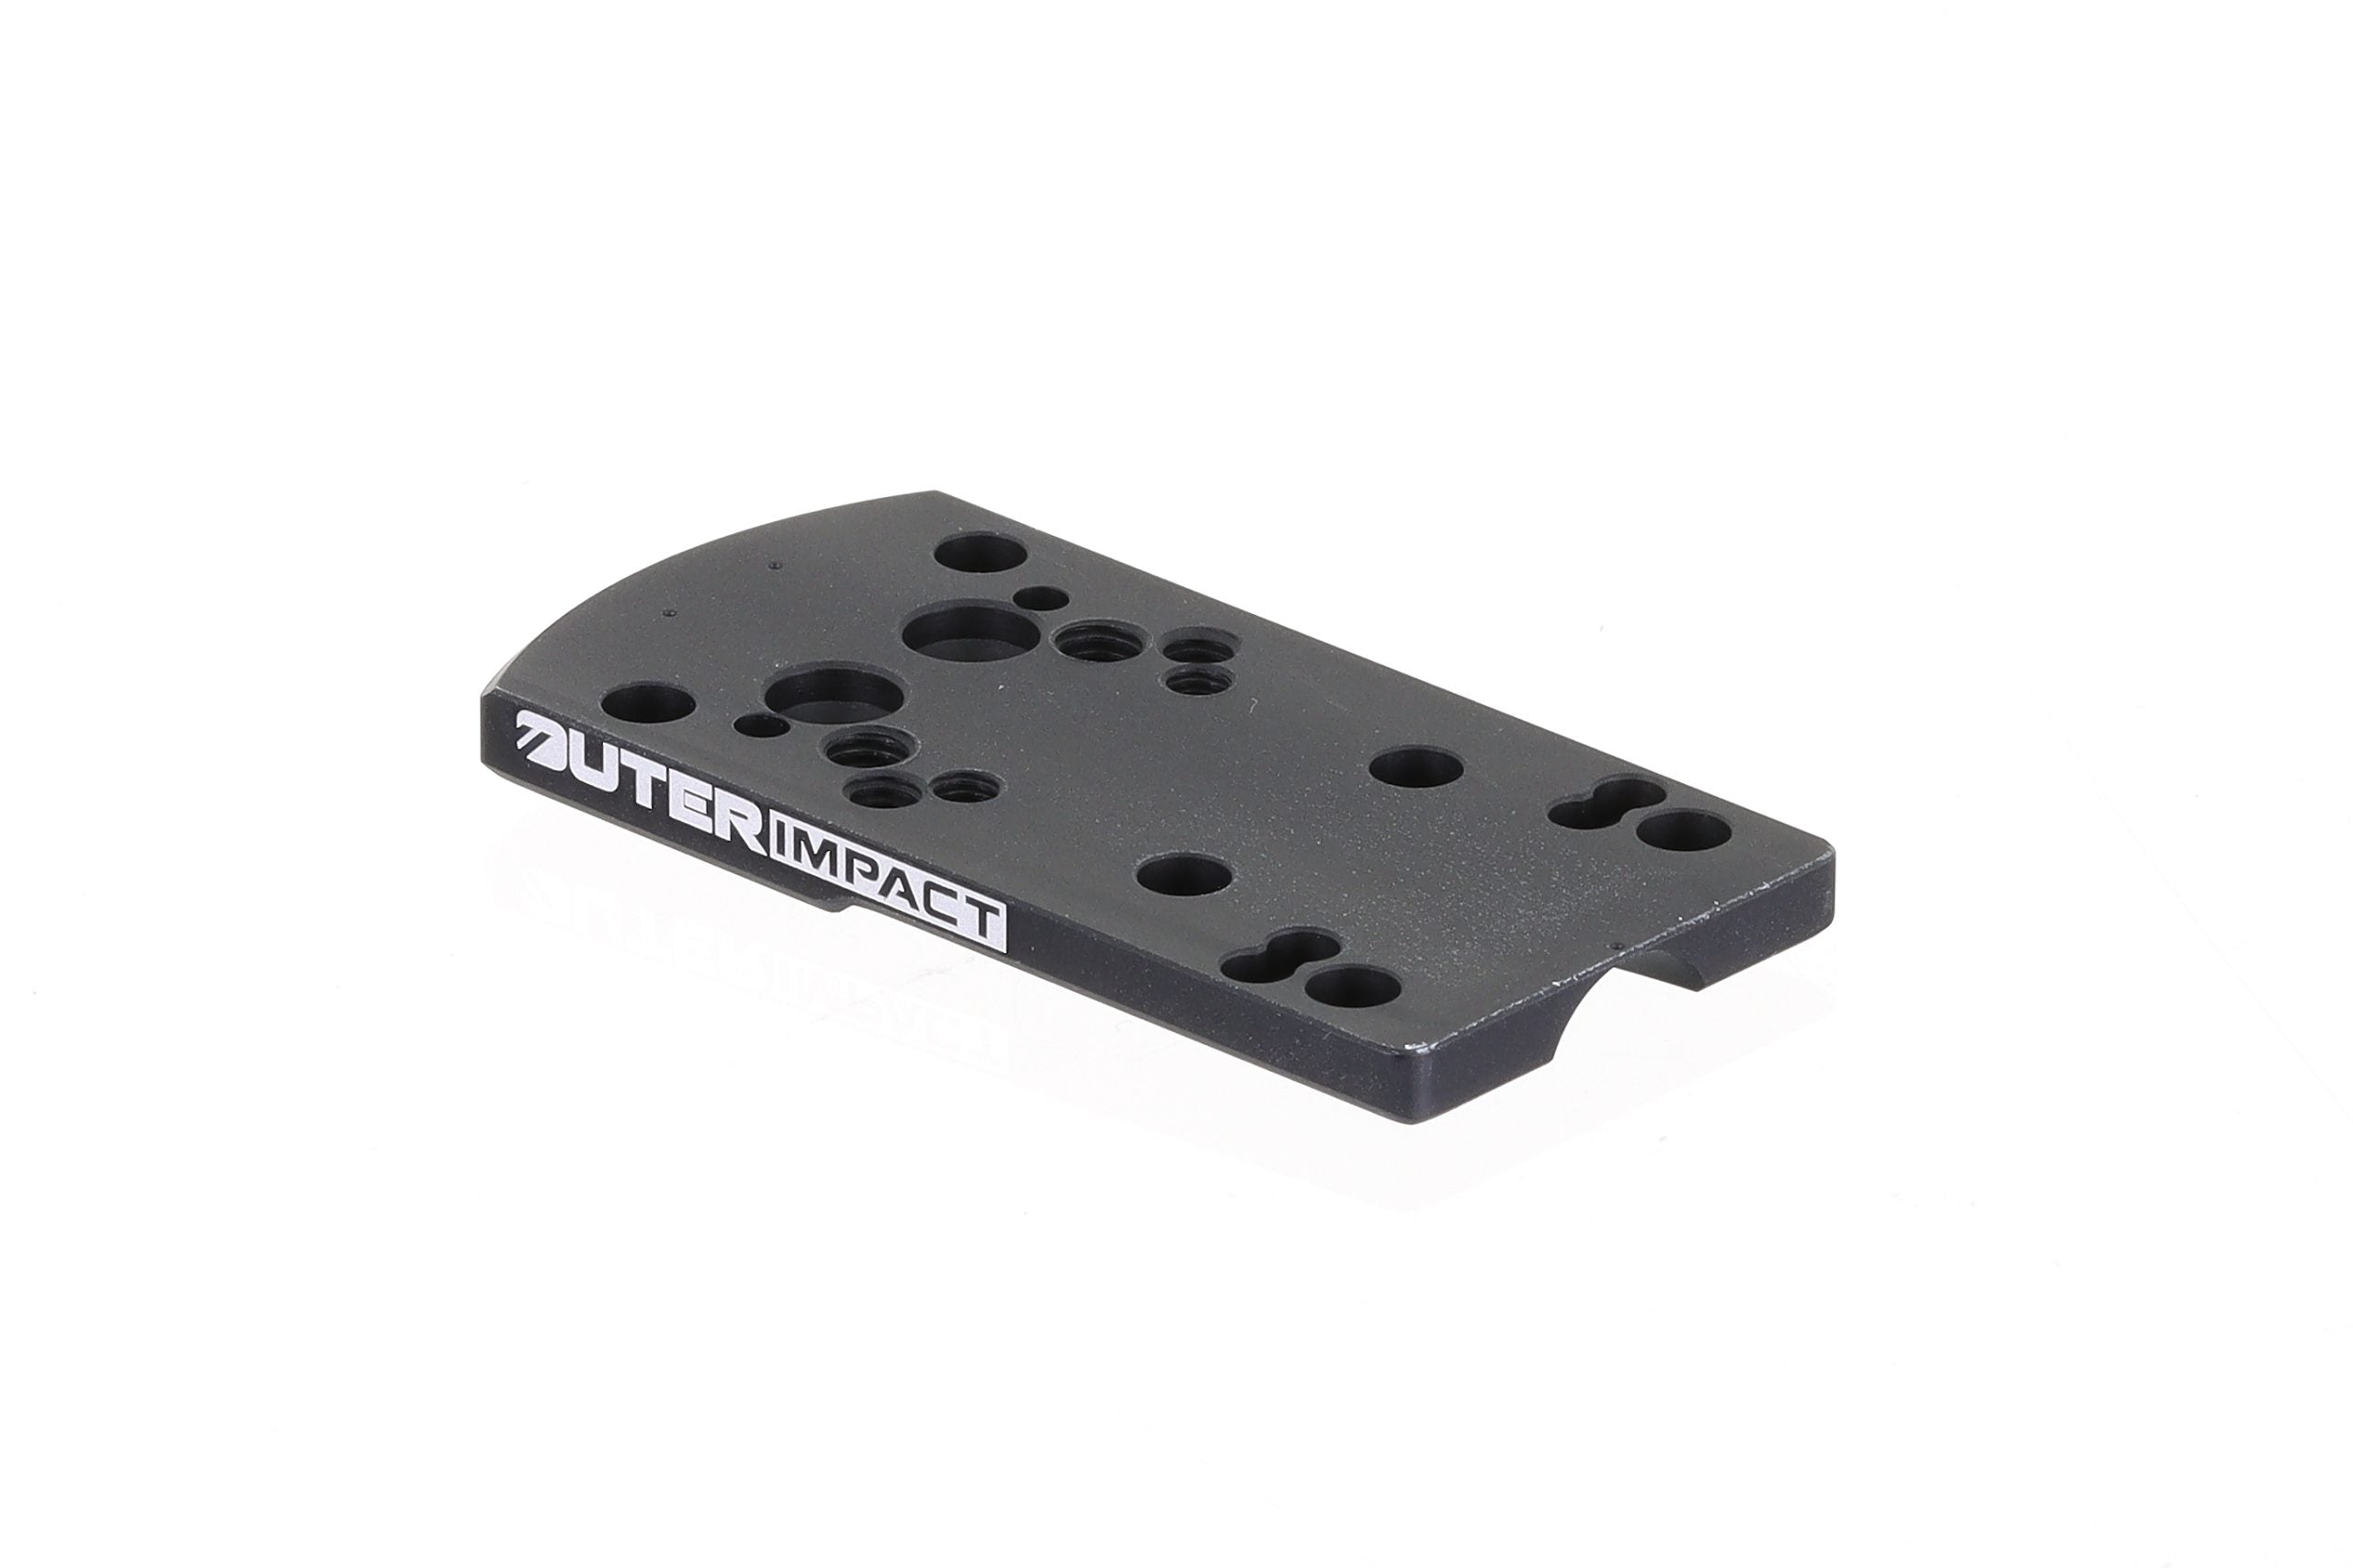 Smith & Wesson M&P 380/9mm EZ Pistol Red Dot Adapter Mount Plate - OuterImpact